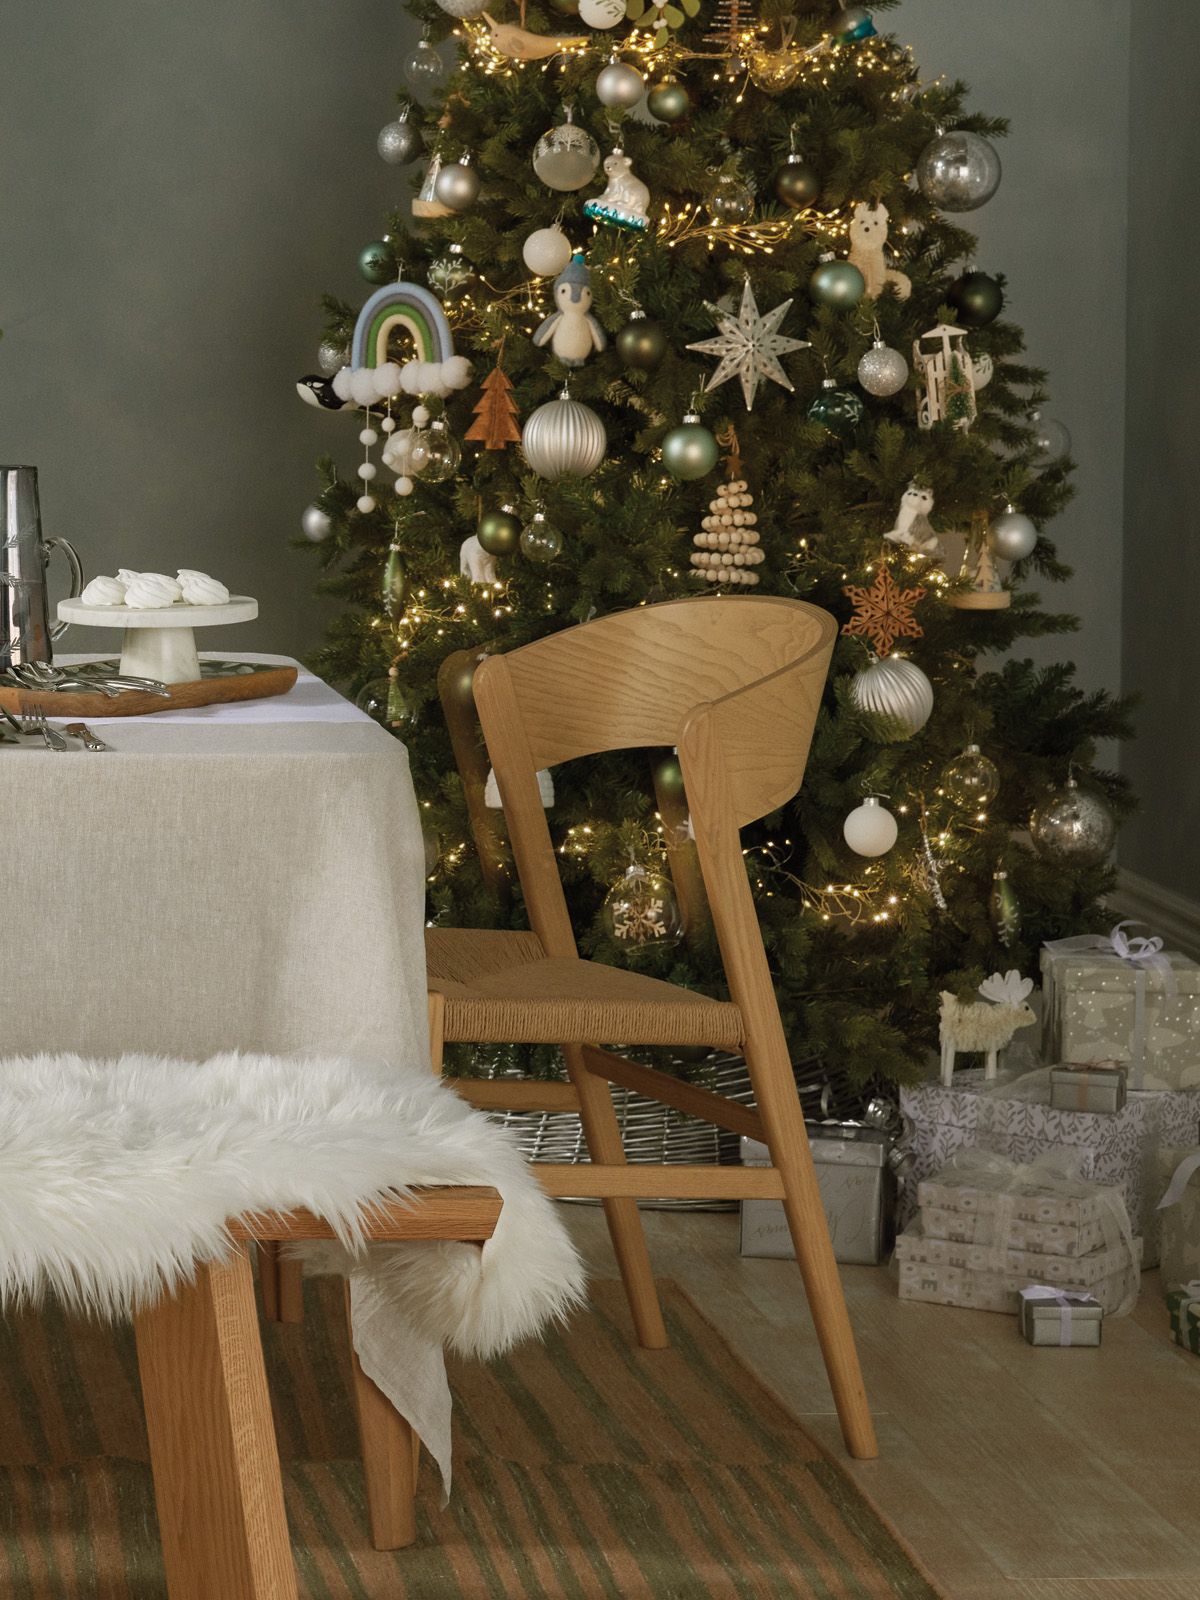 Dining chairs by a table in front of a Christmas tree